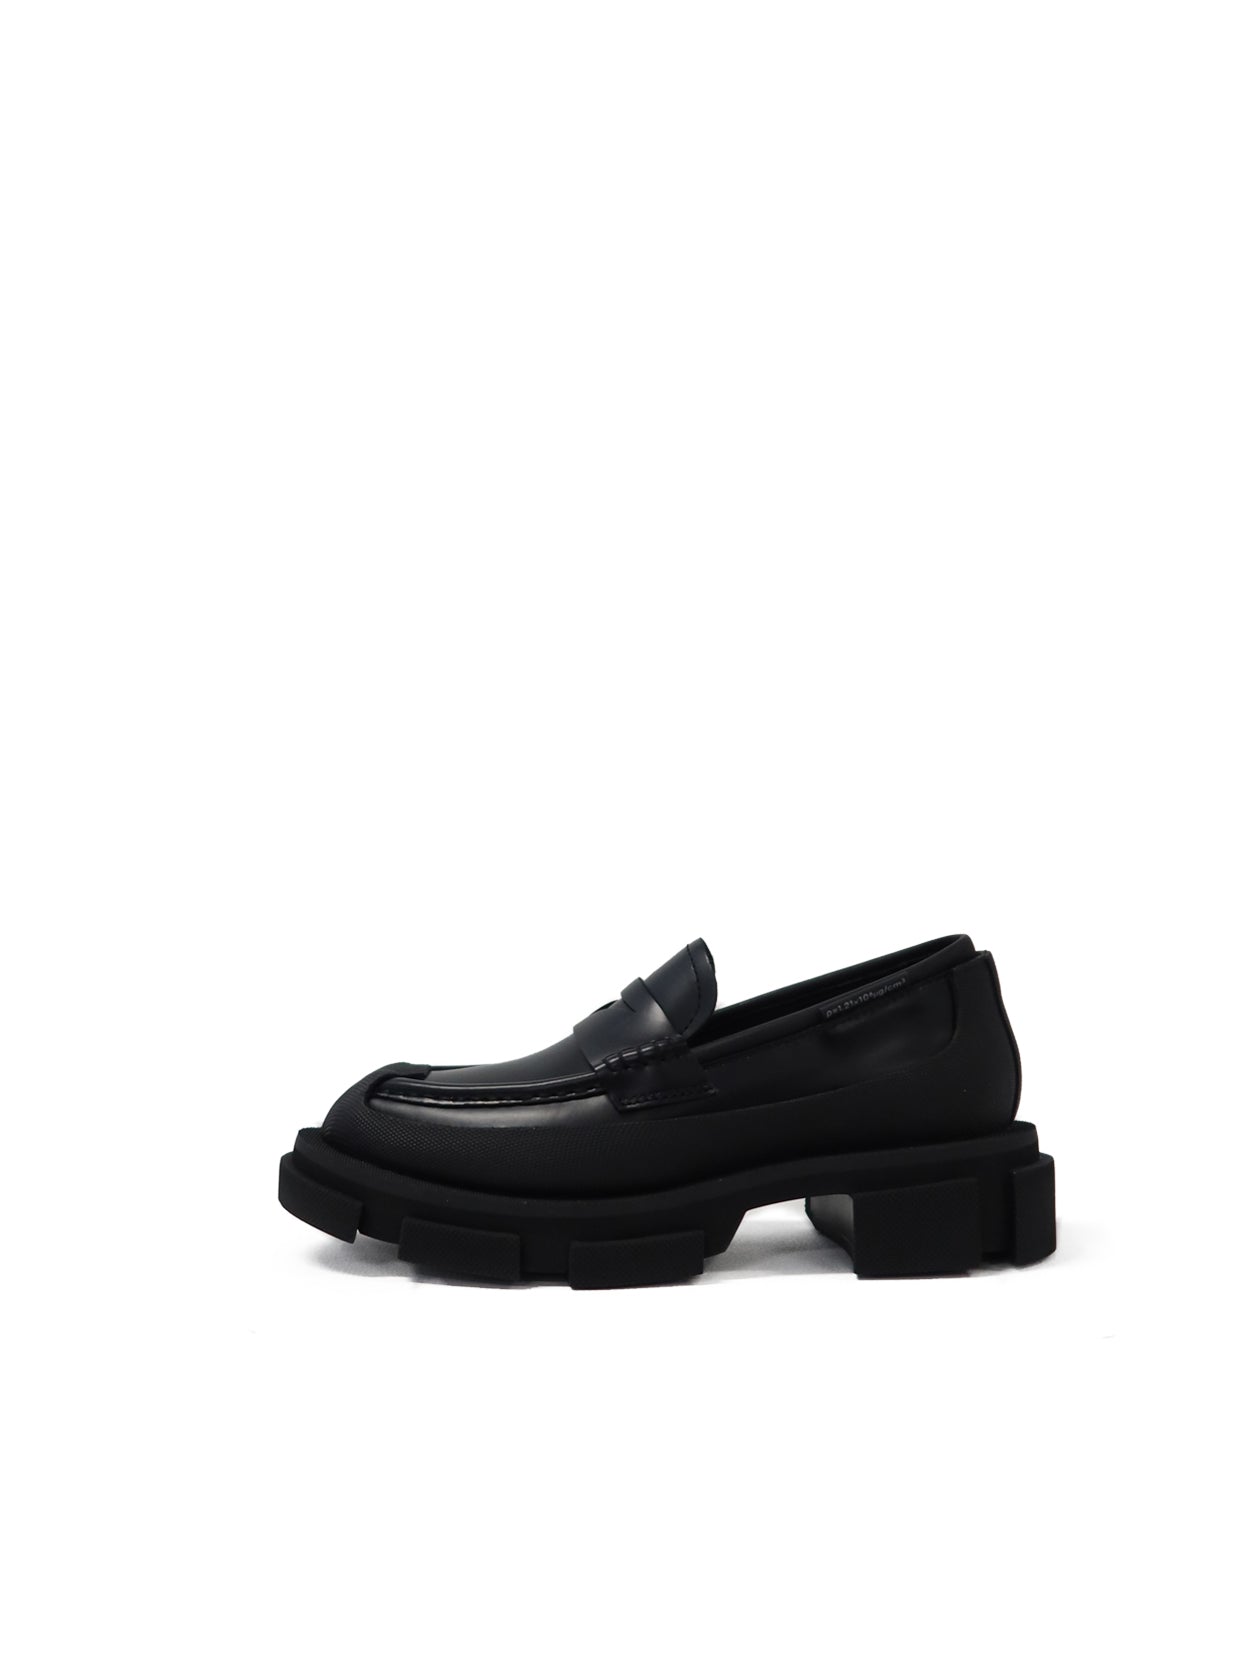 BOTH Gao Loafers